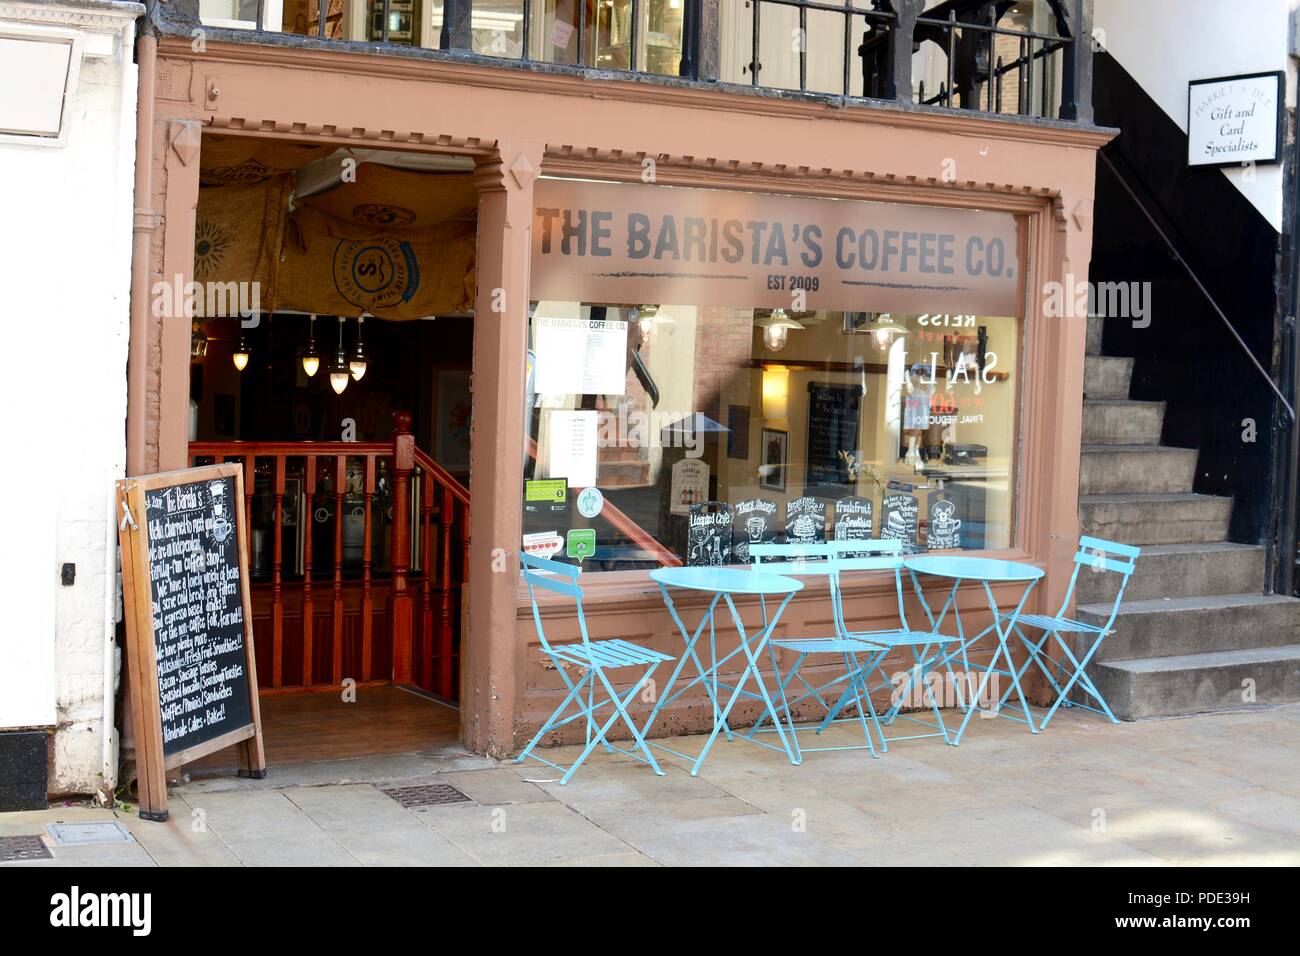 The Barista's Coffee Co. coffee shop in Chester, Cheshire, UK Stock Photo